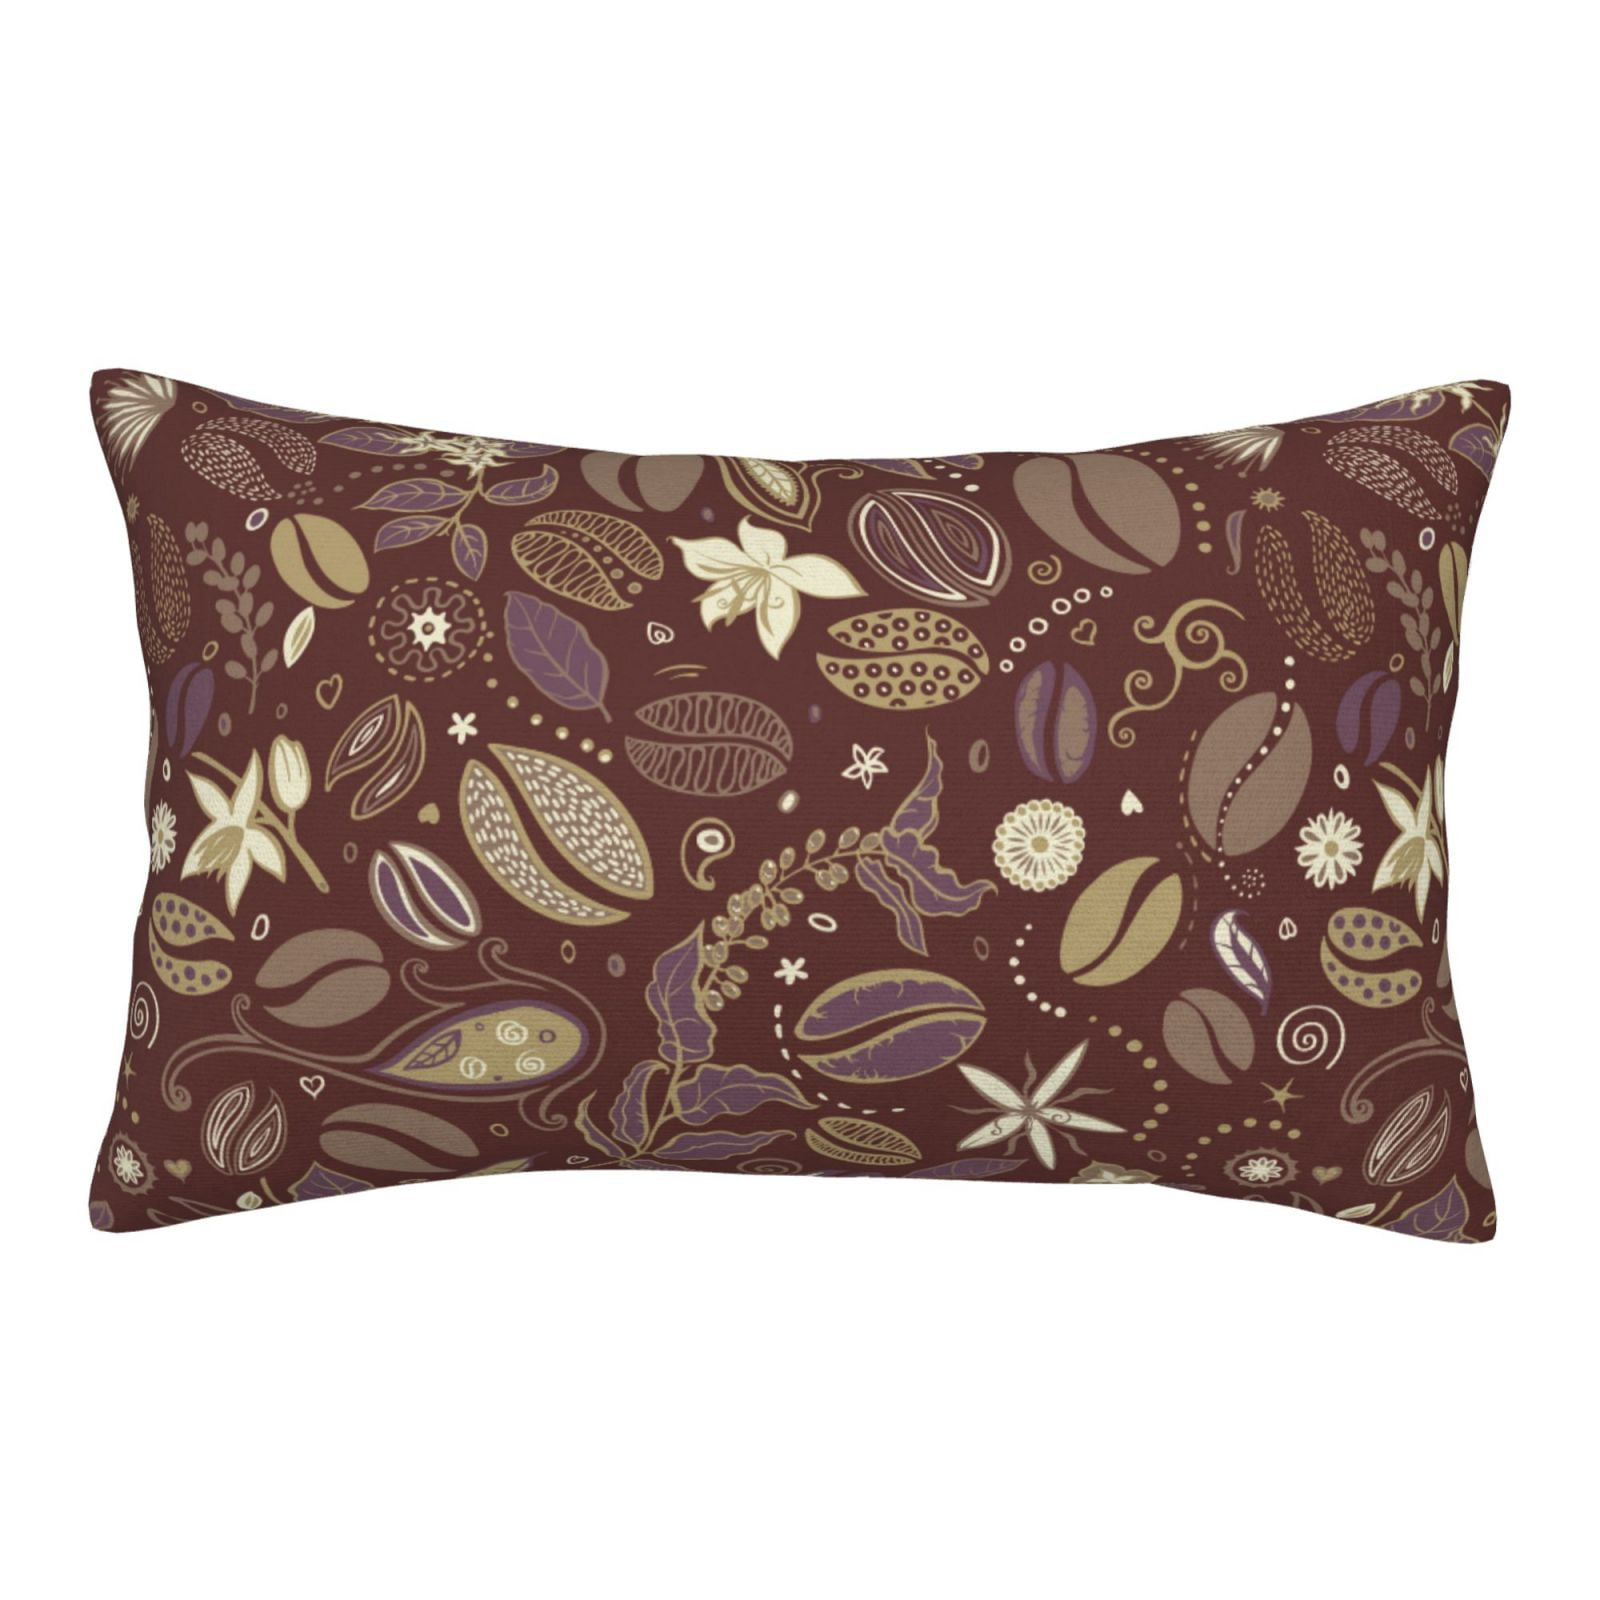 Daiia Coffee and Flowers Bedding Waterproof Pillow Protector Zippered ...